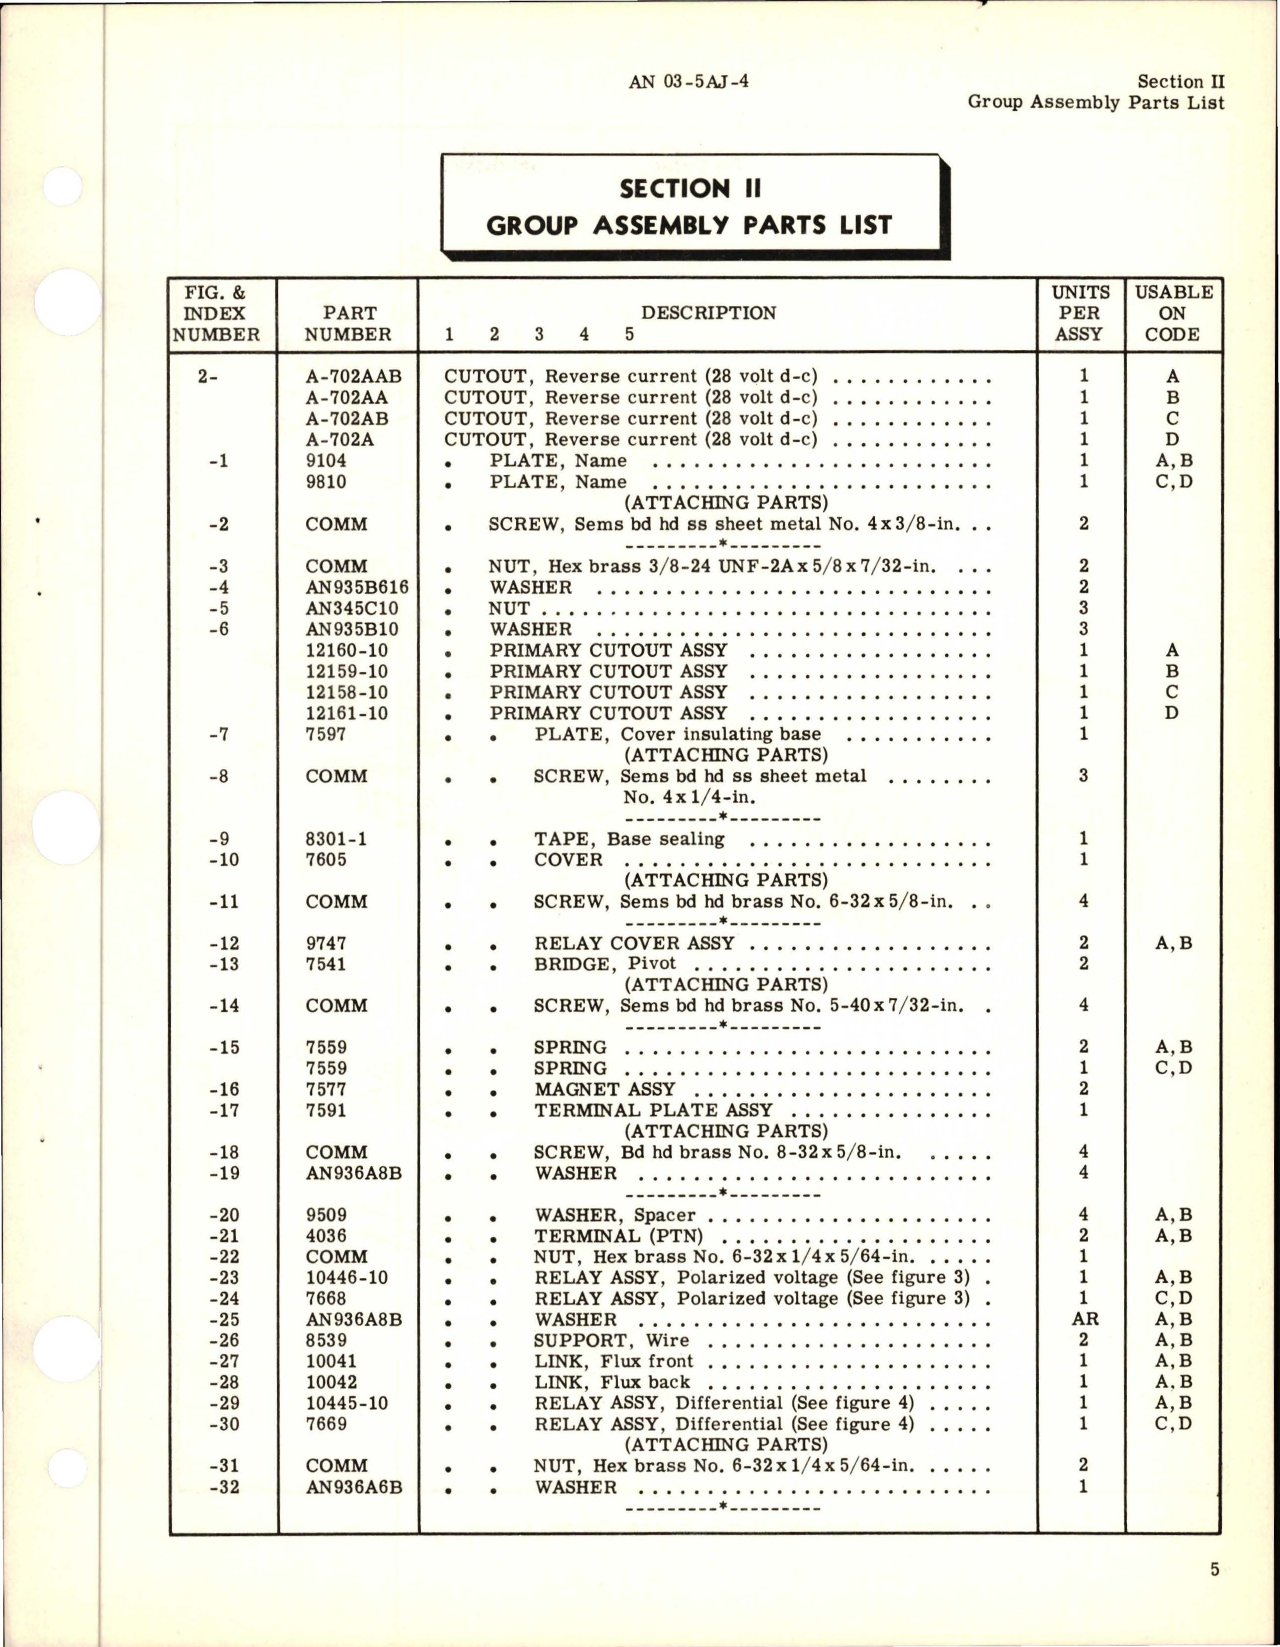 Sample page 7 from AirCorps Library document: Illustrated Parts Breakdown for Reverse Current Cutout - AN 3025-2 - Models A-702AAB, A-702AA, A-702AB, and A-702A